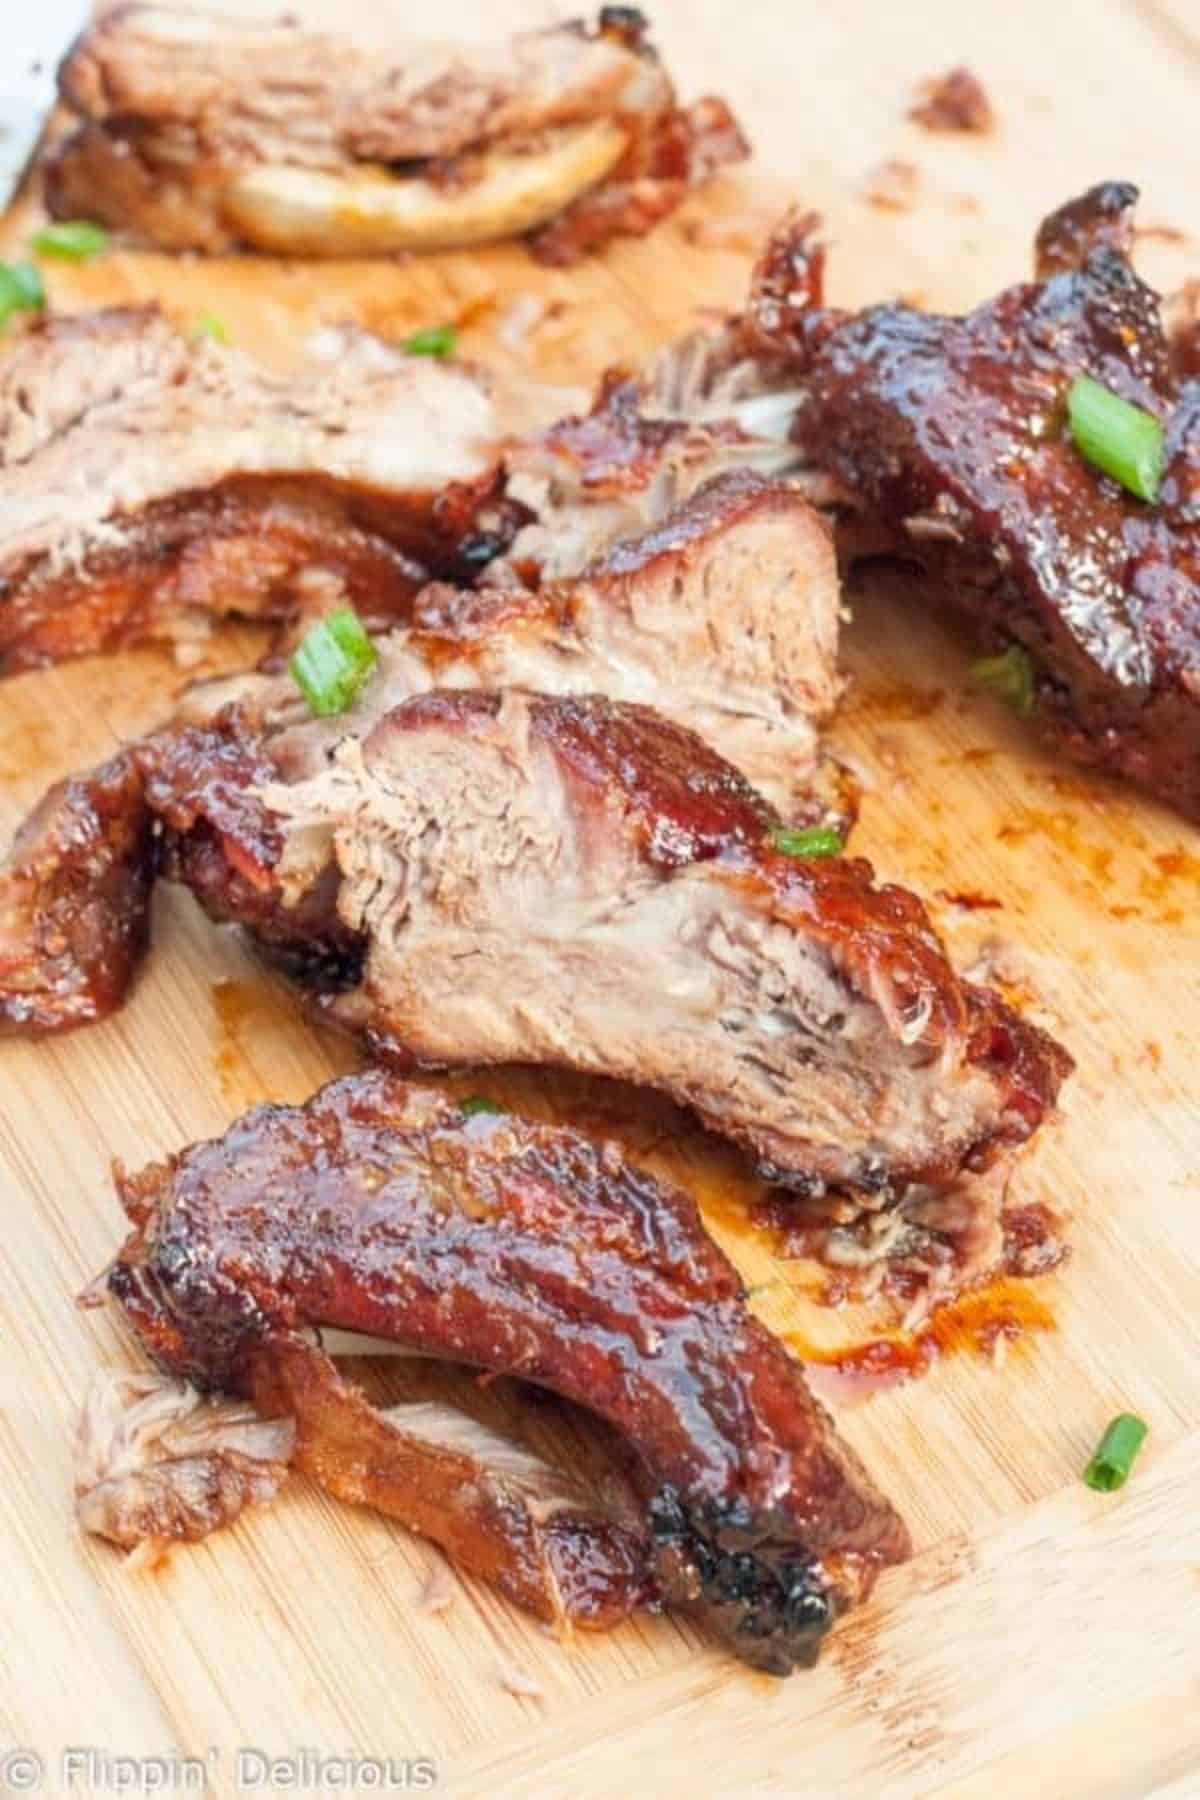 Gluten-Free Sticky Asian Ribs on a wooden cutting board.